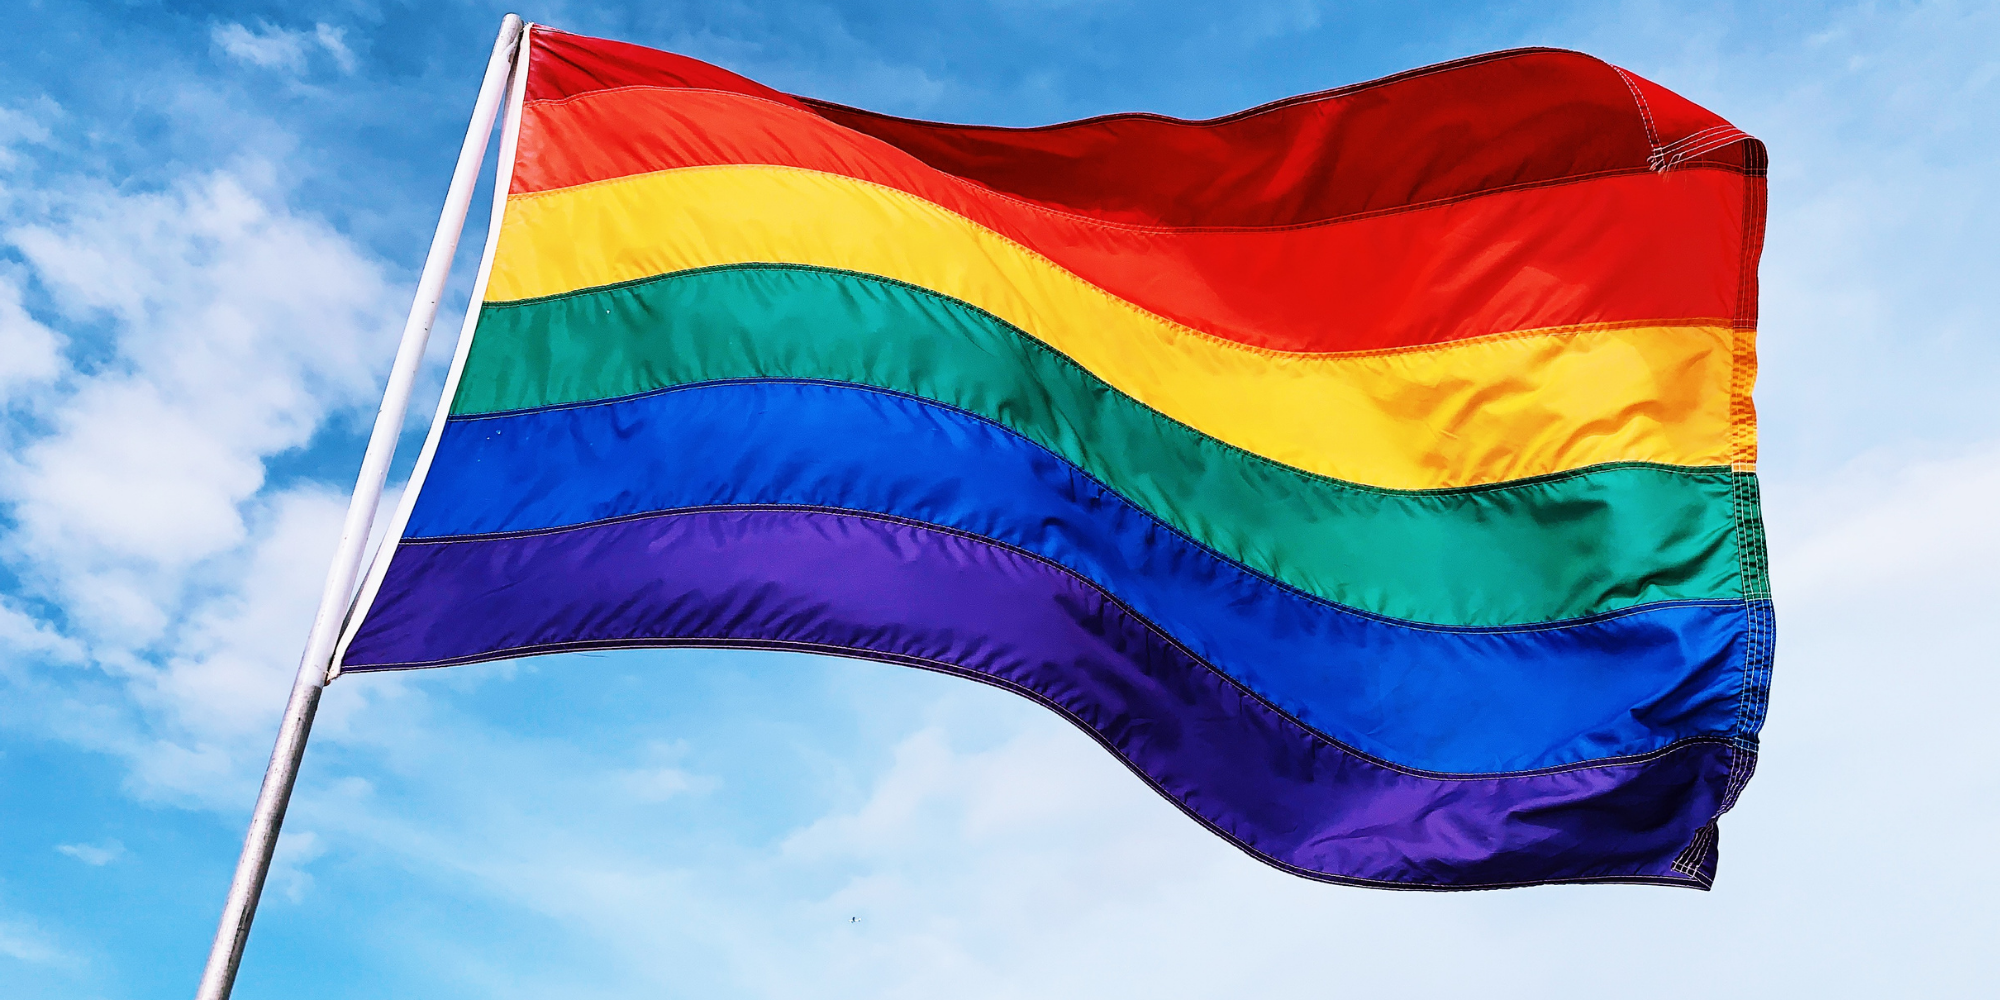 10 Ways to Promote a Culture of Respect and Belonging for LGBTQ+ Employees